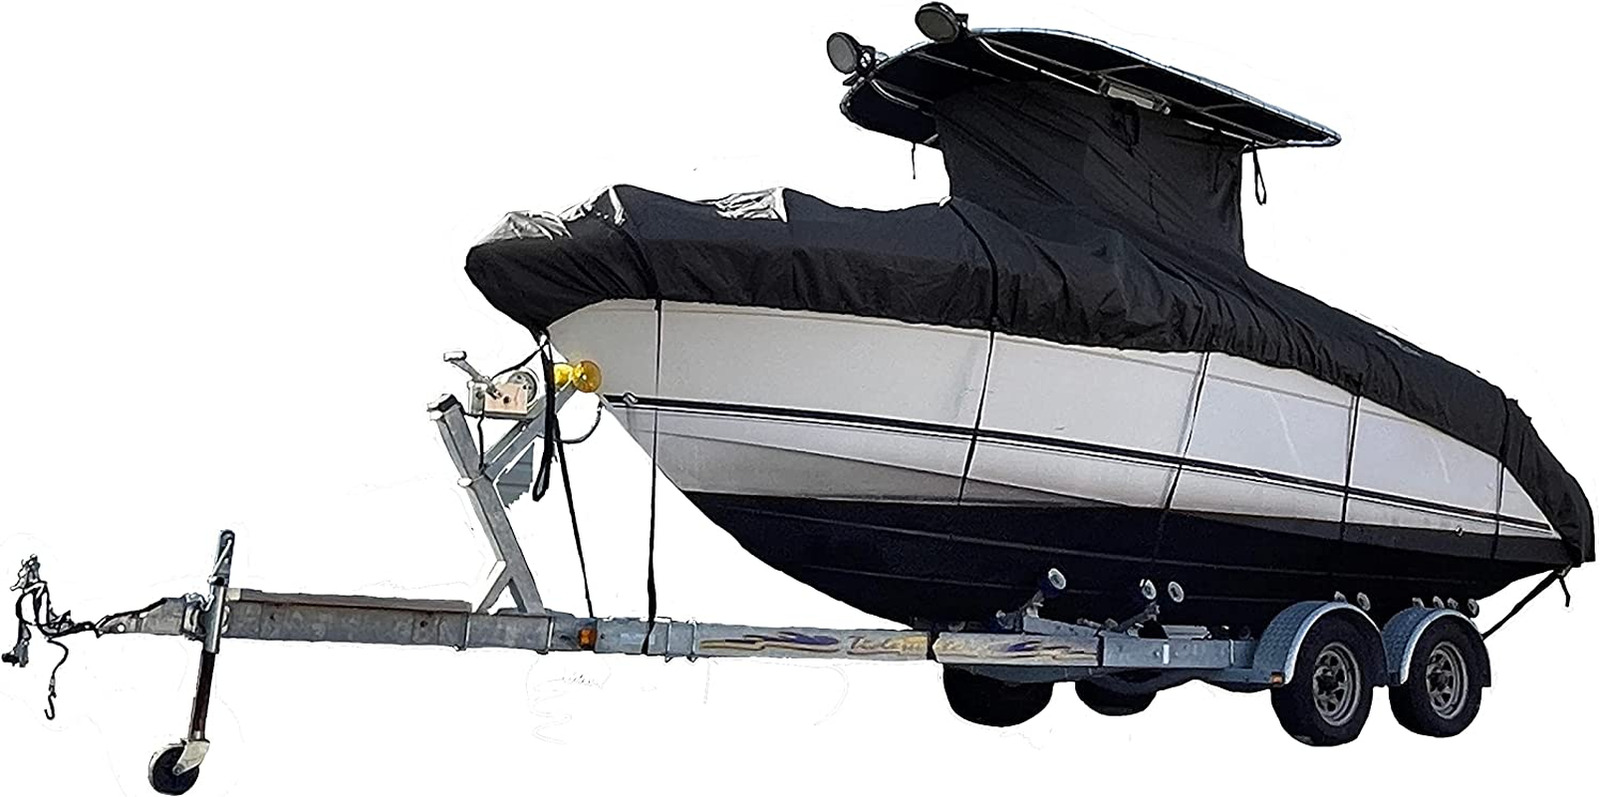 Heavy Duty T-Top Boat Cover, Fits 20Ft to 30Ft Long Center Console Boat with T-T